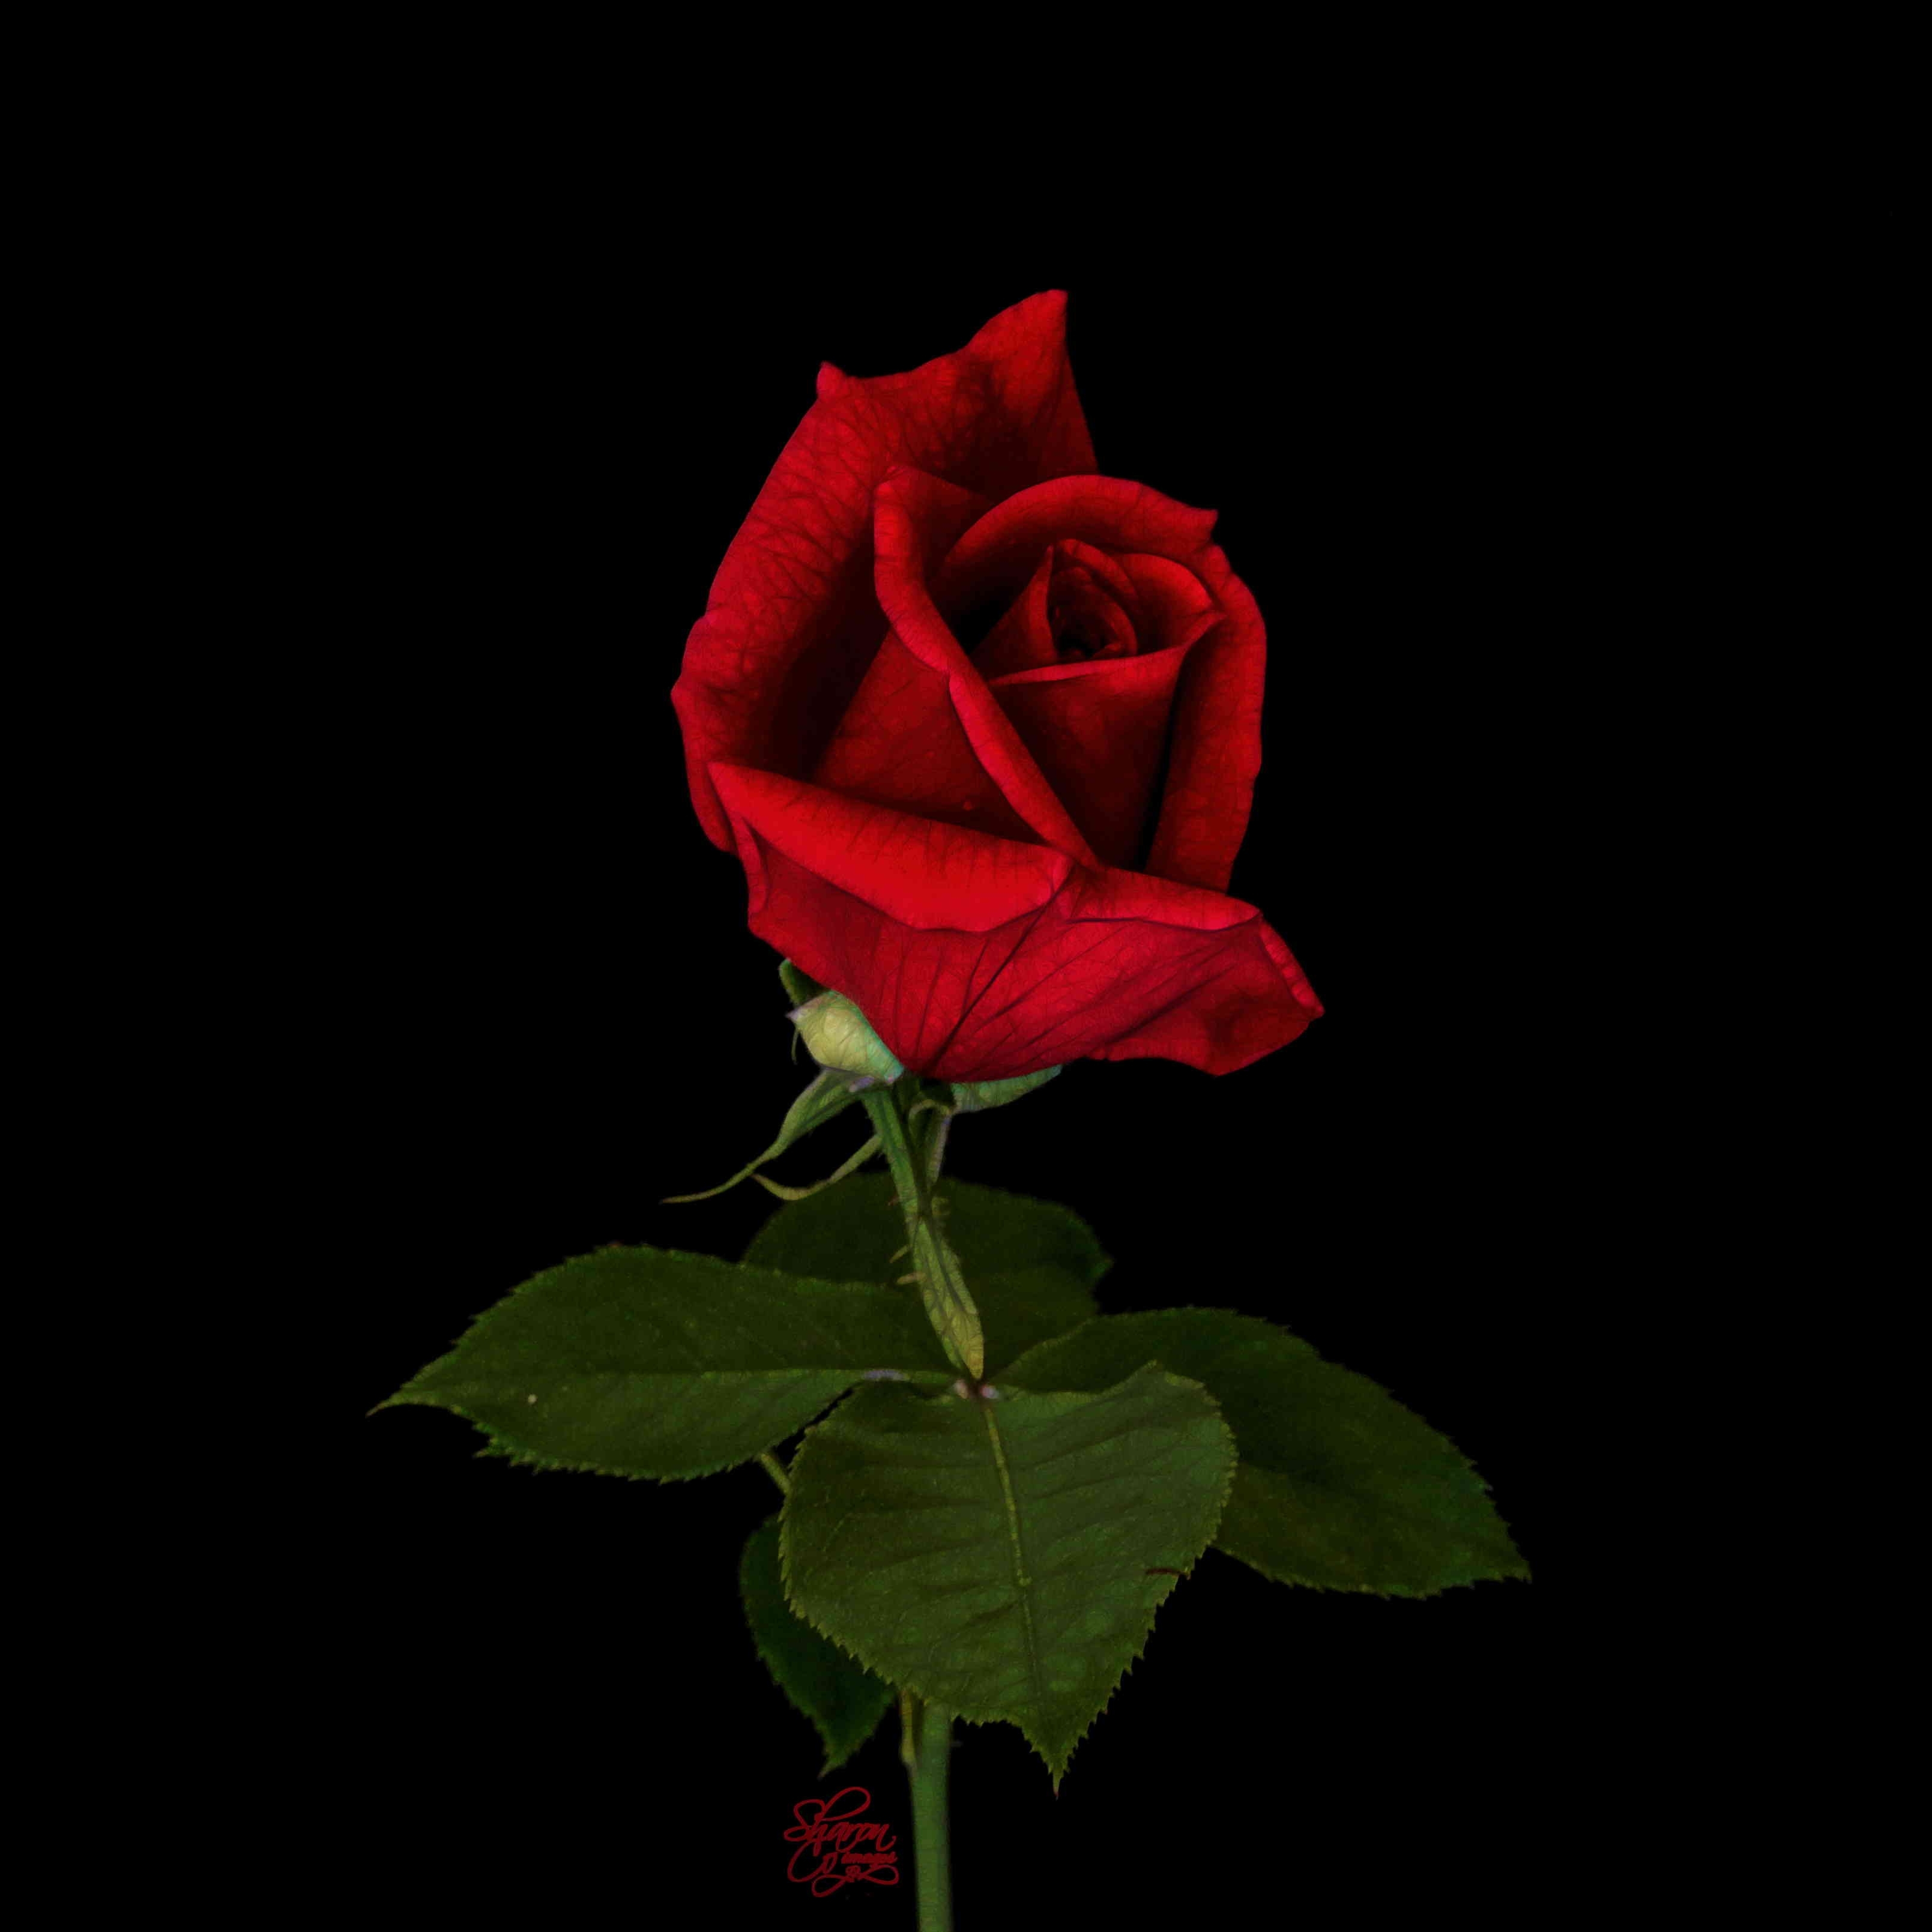 10 Top Single Red Rose Pictures FULL HD 1080p For PC Desktop 2020